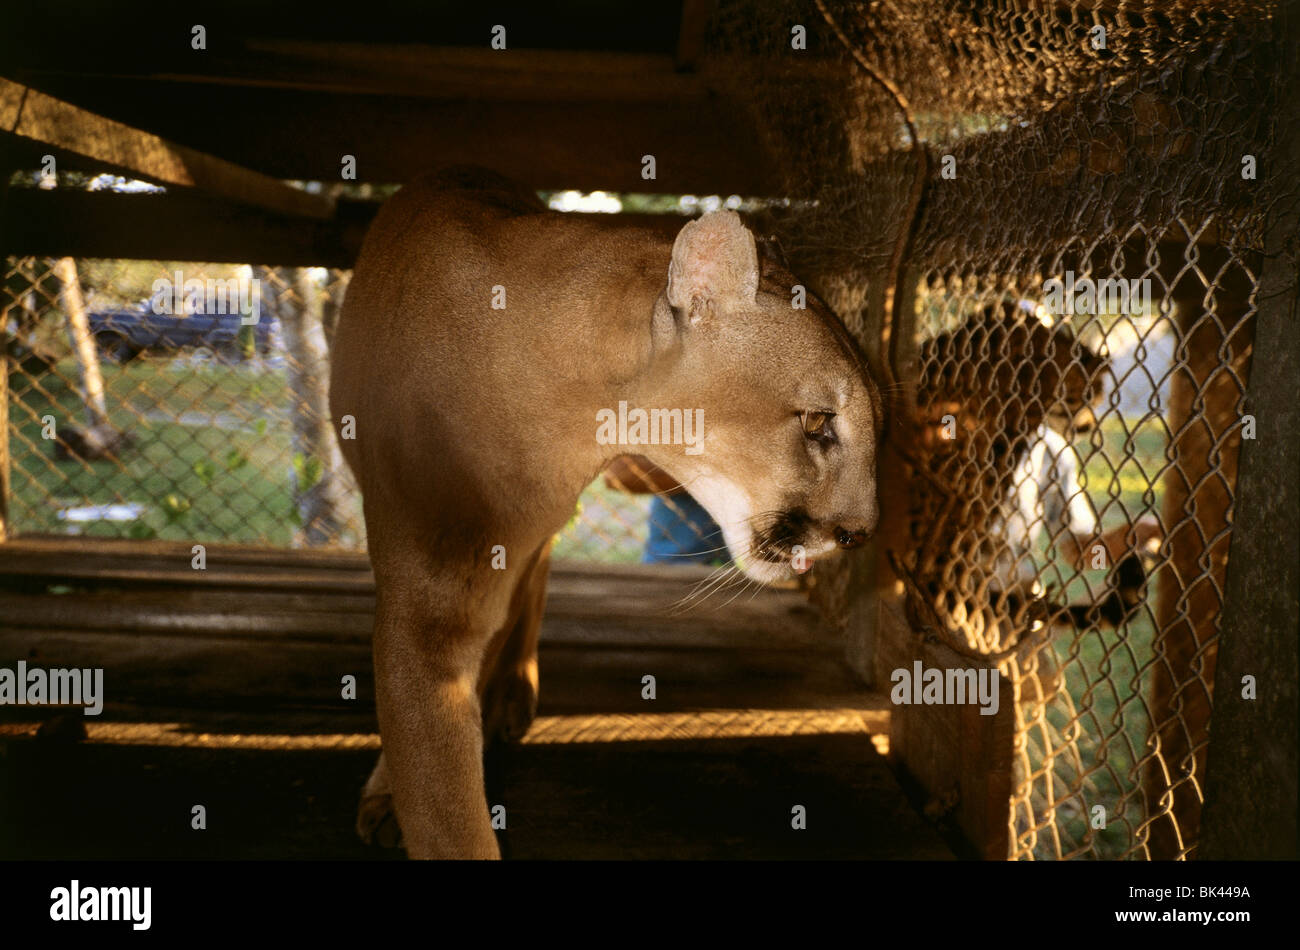 Cougar in a cage, Belize, Central America Stock Photo